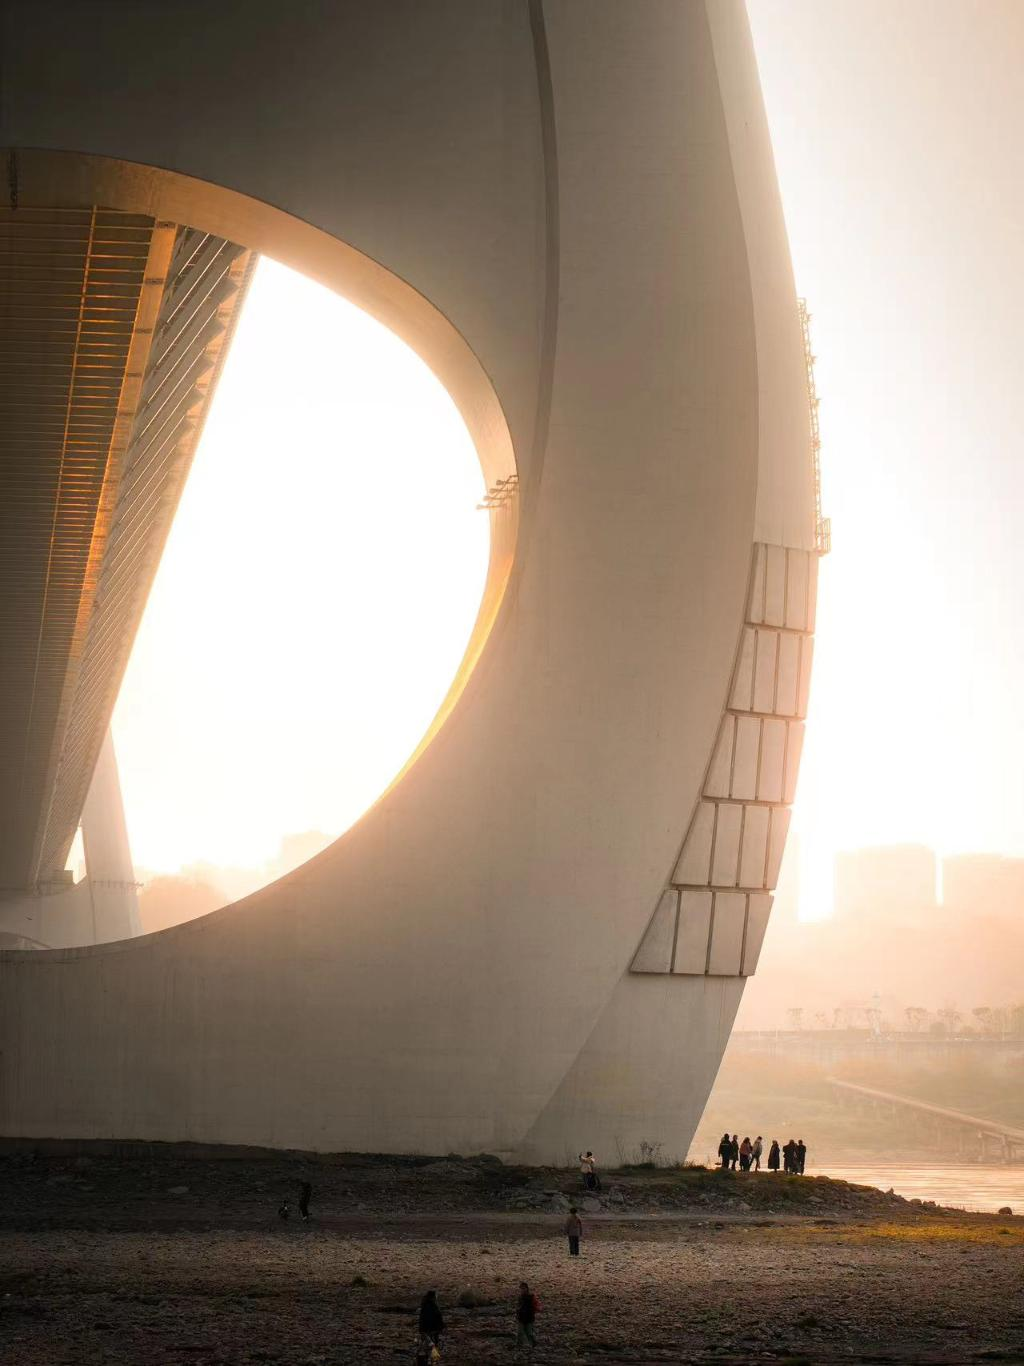 The tower of the Baijusi Yangtze River Bridge produces the scenes in “Interstellar”. (Photo provided by the interviewee)